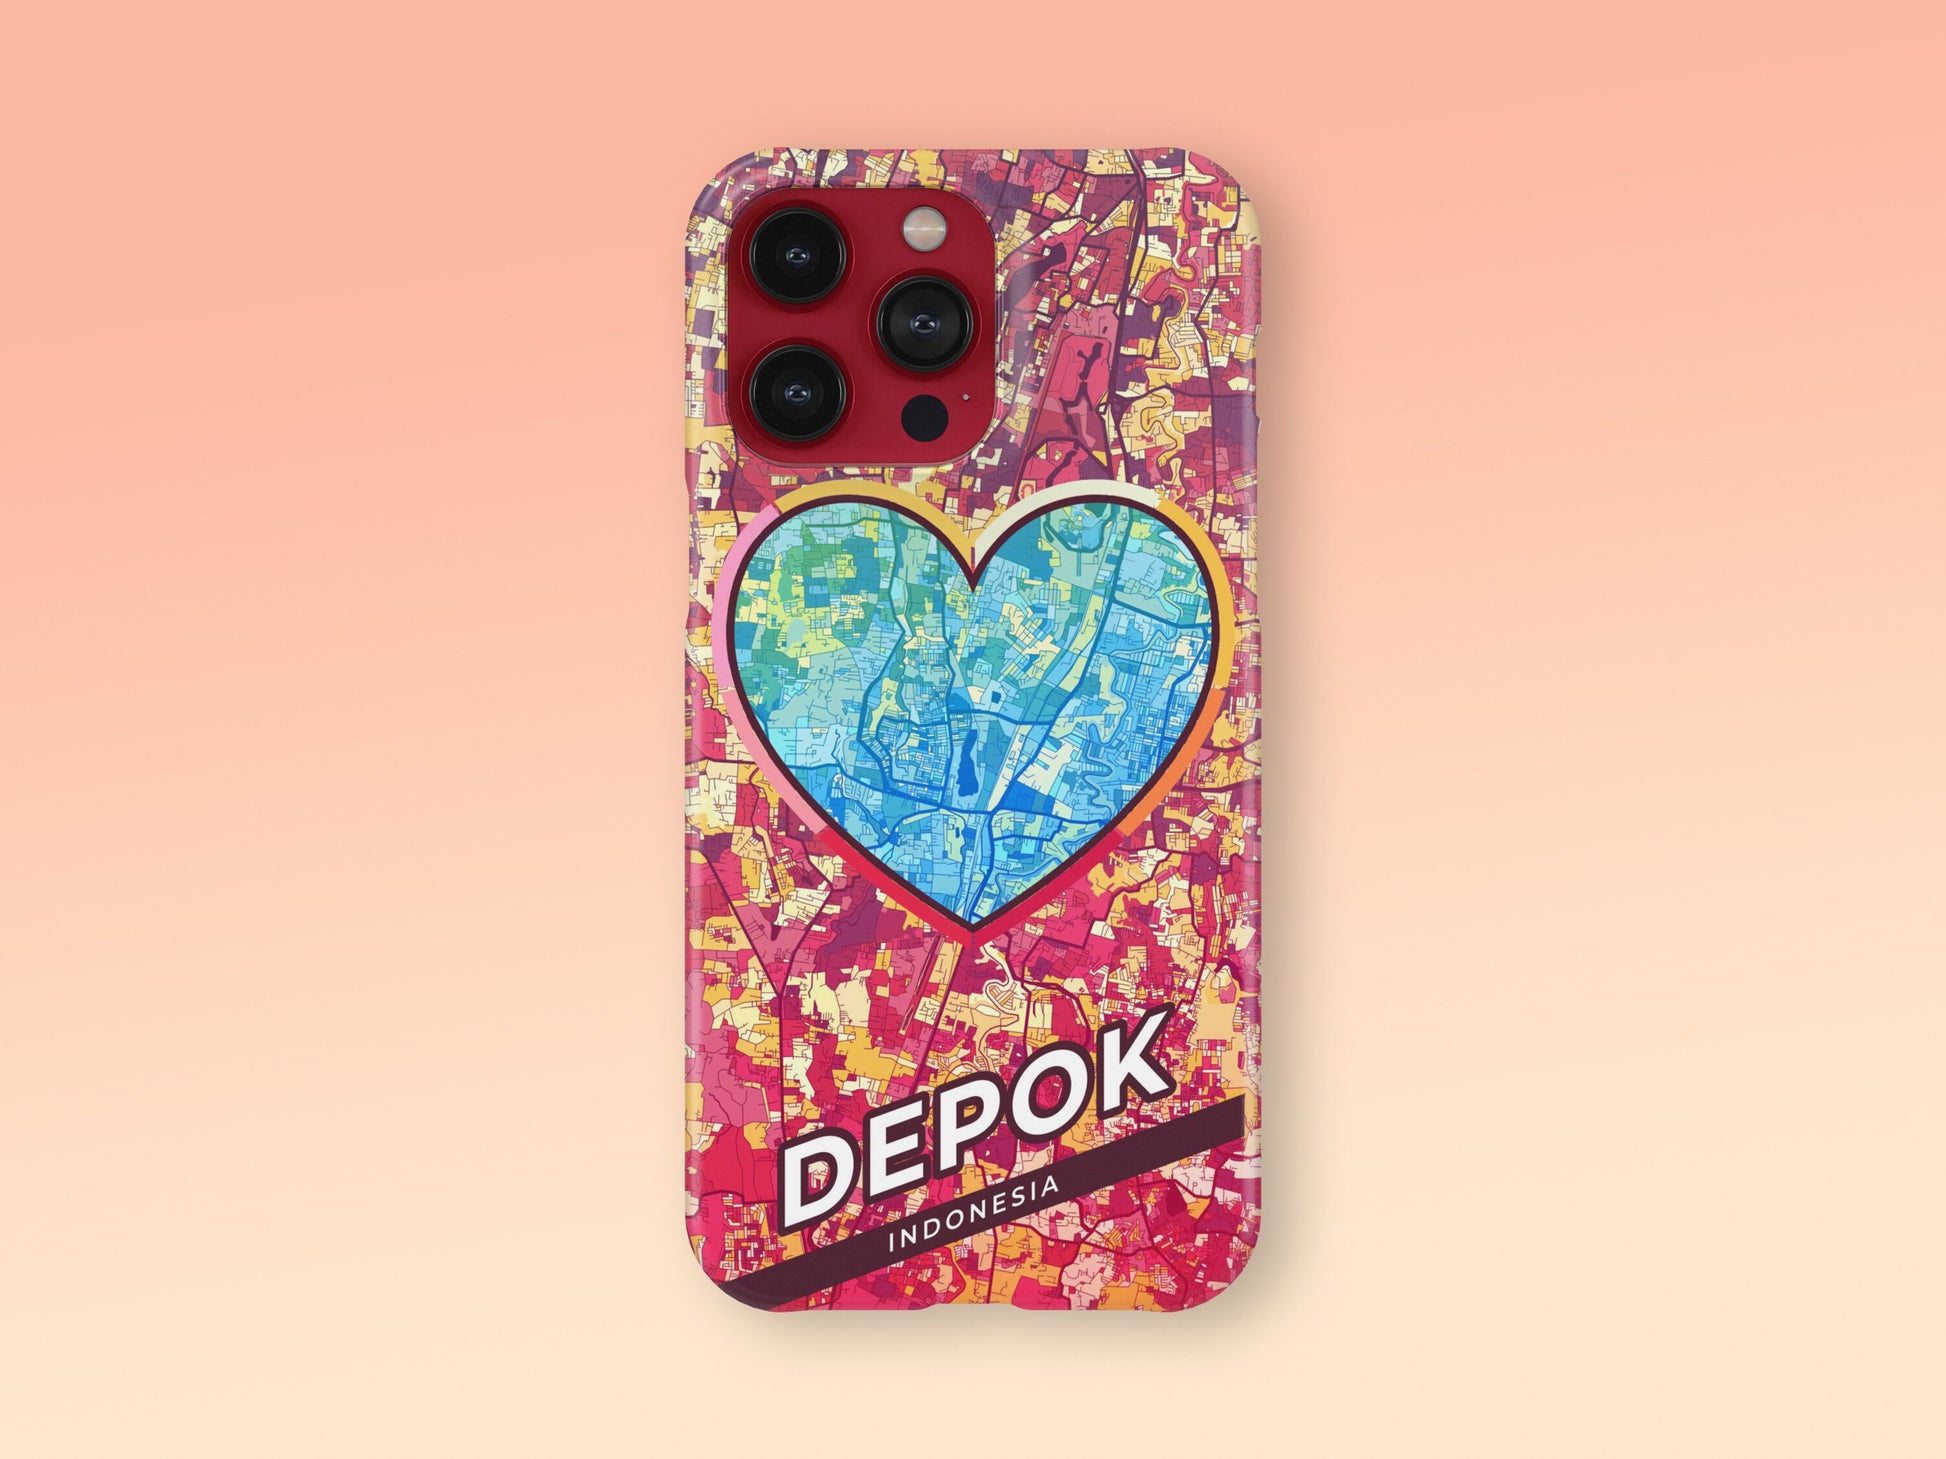 Depok Indonesia slim phone case with colorful icon. Birthday, wedding or housewarming gift. Couple match cases. 2